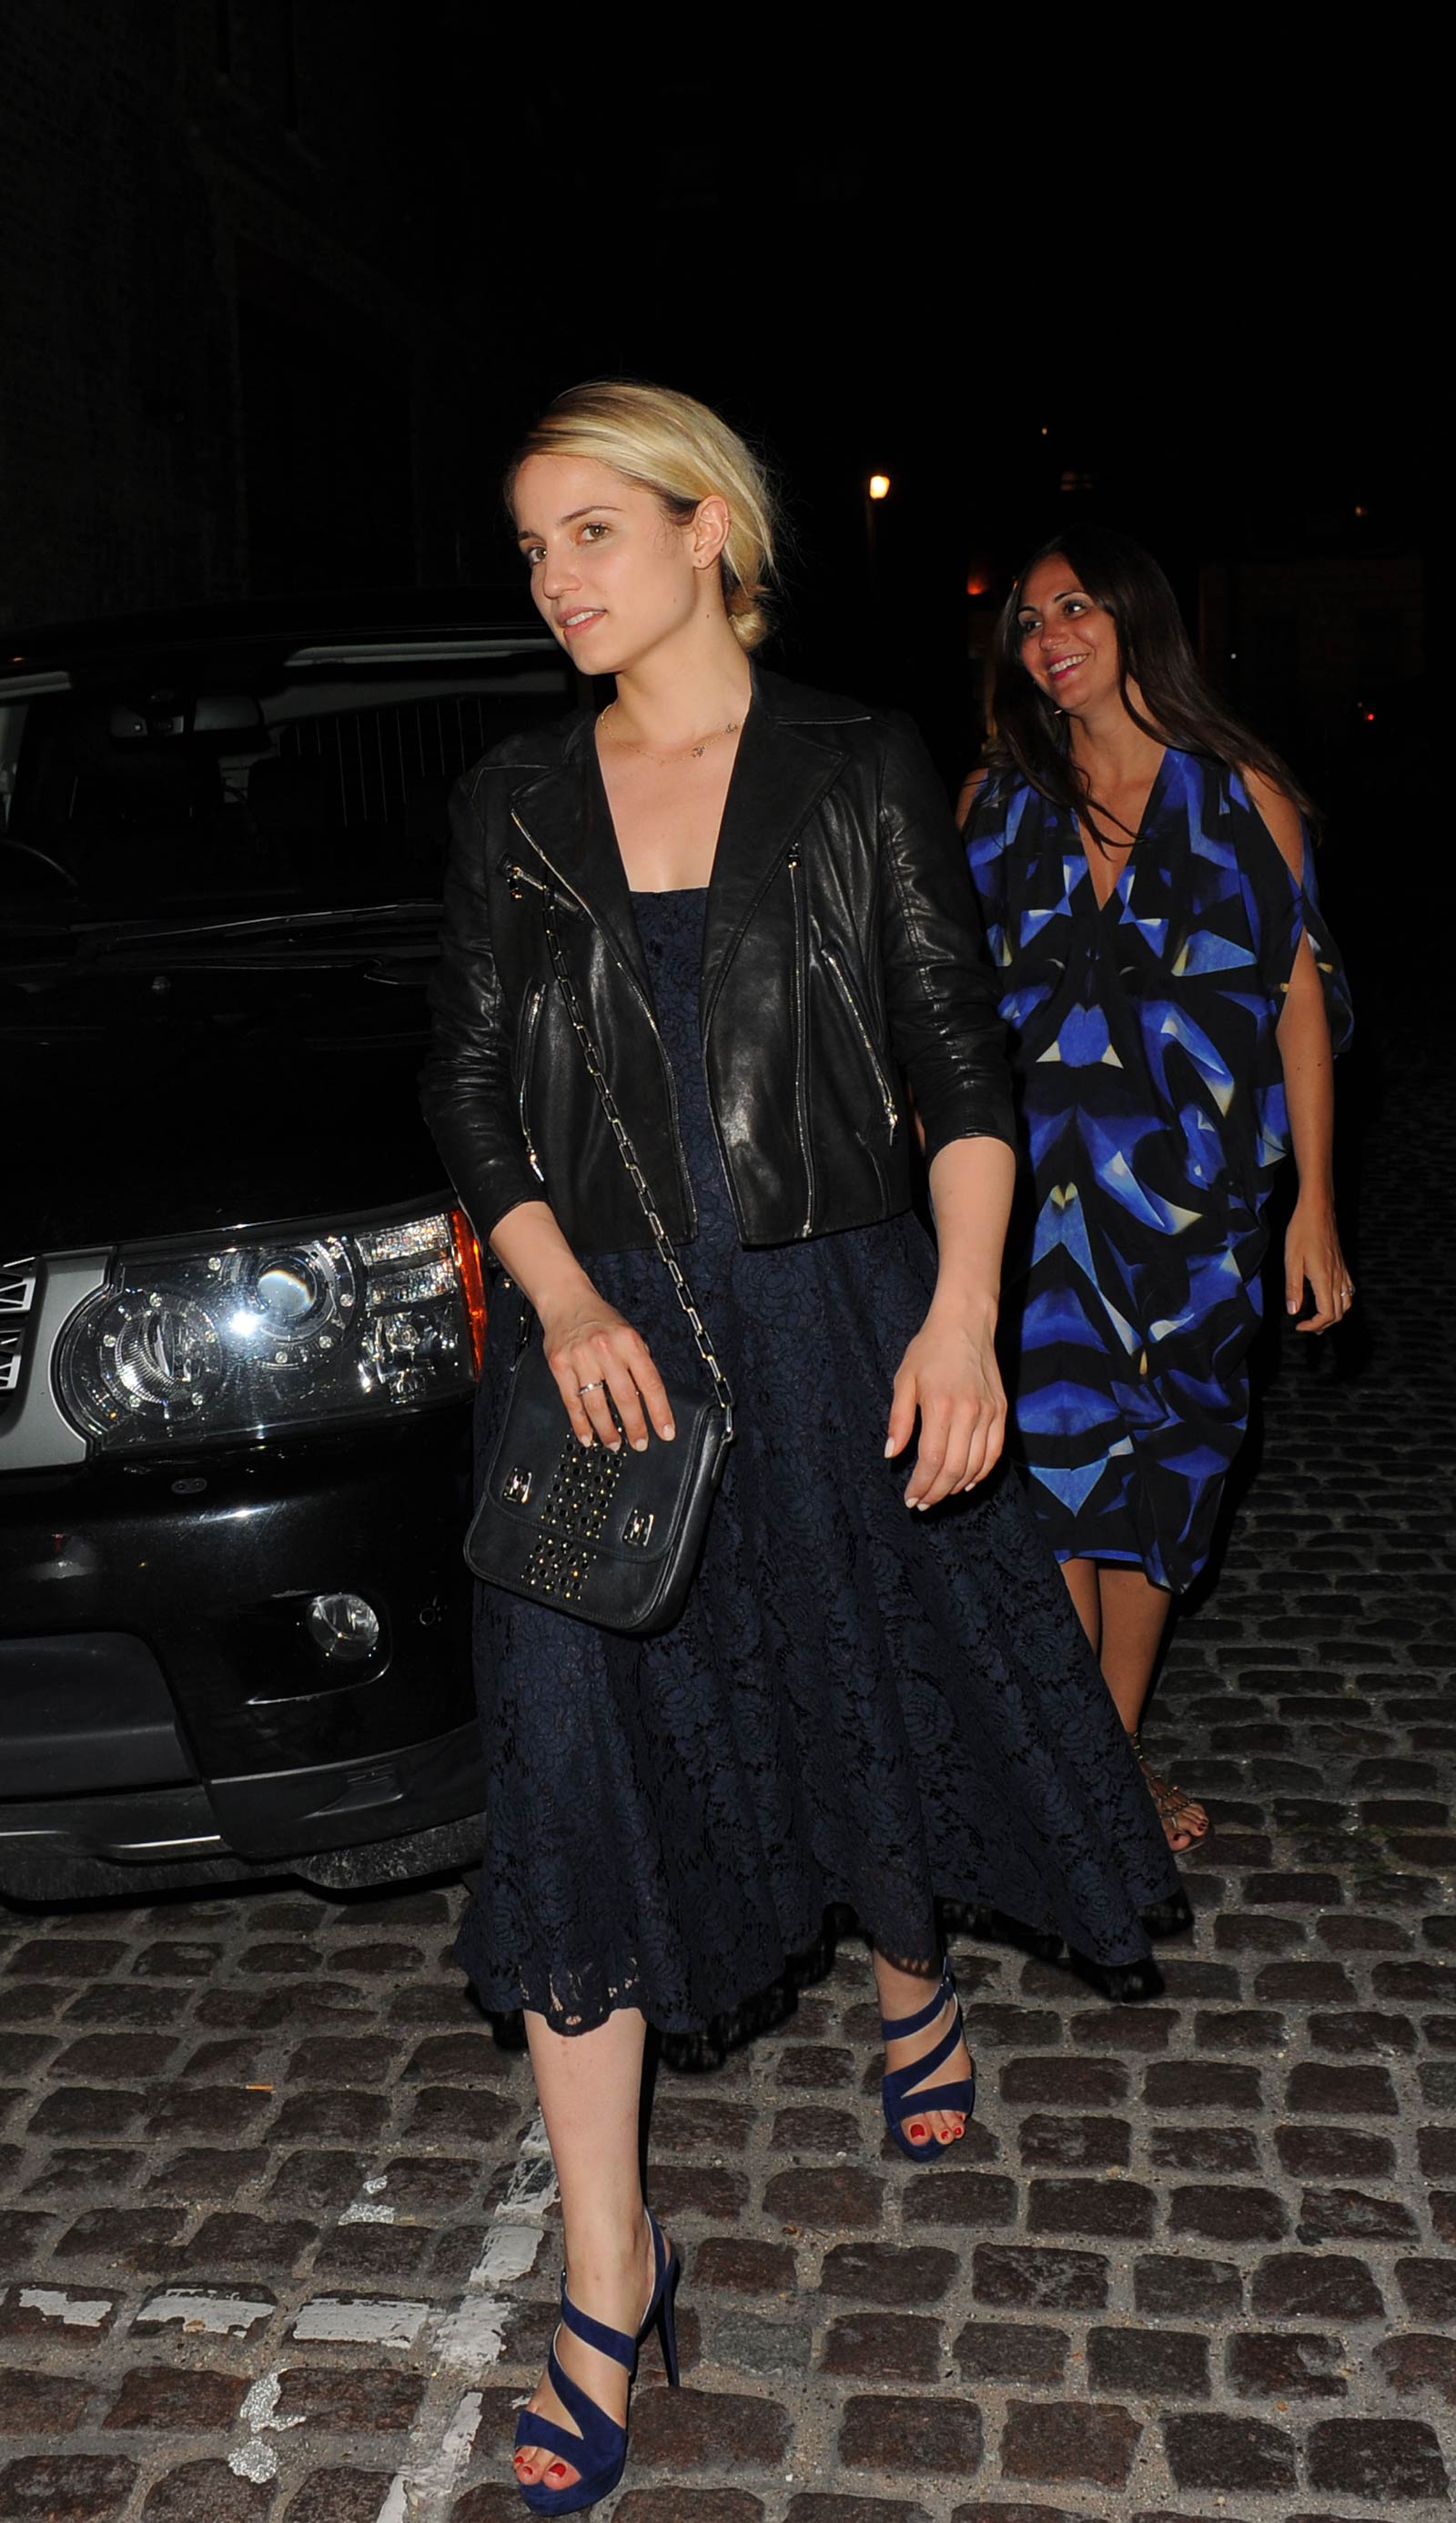 Dianna Agron at the Chiltern Firehouse